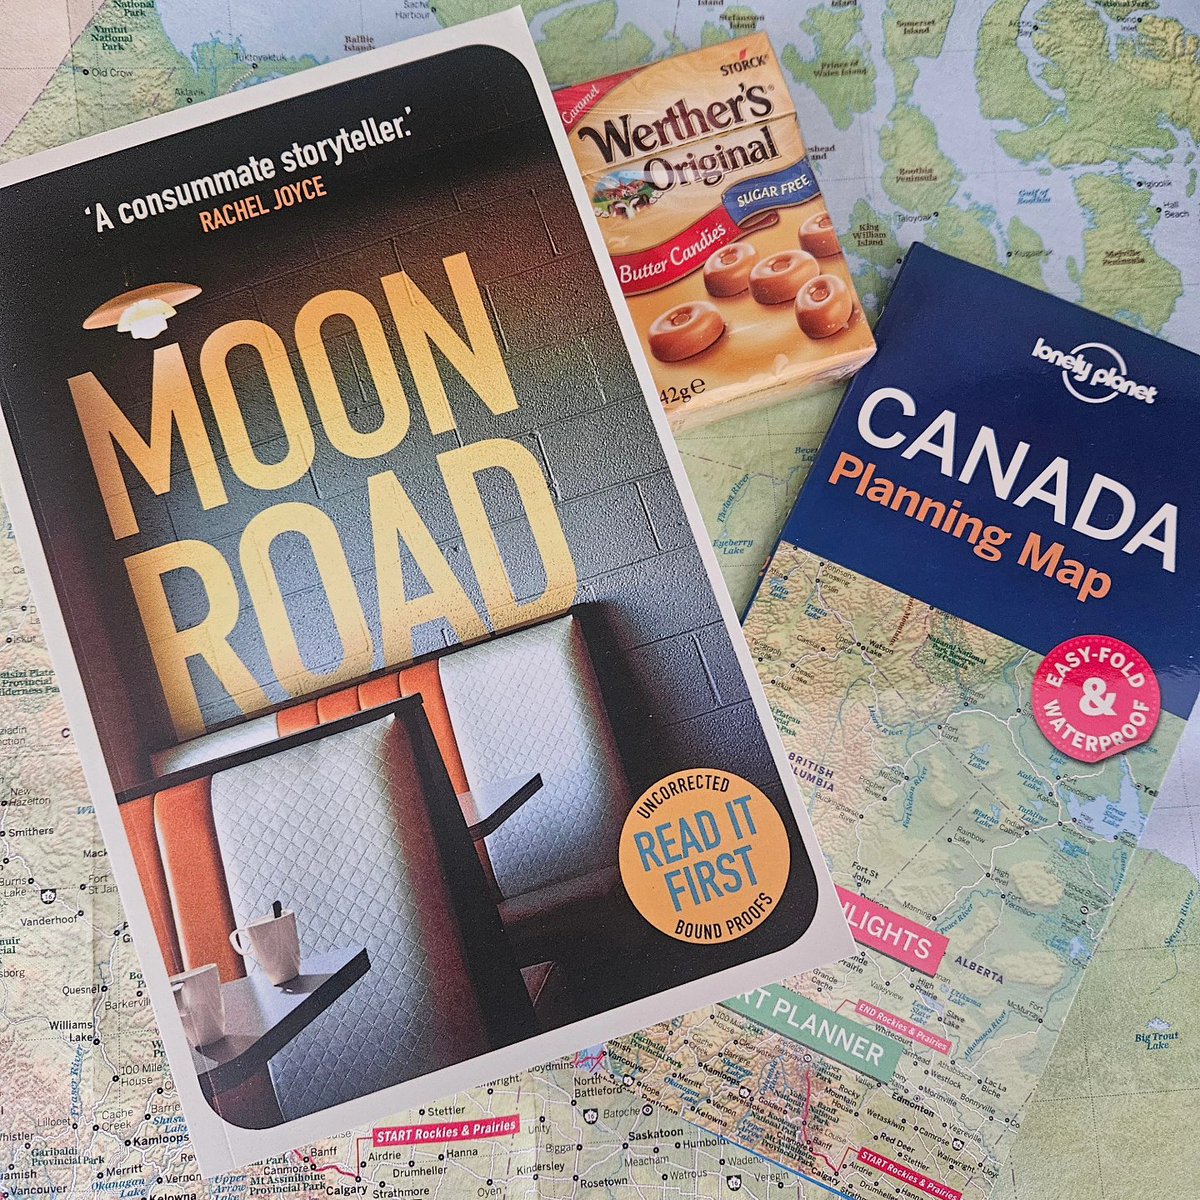 Absolutely thrilled to receive a proof of Moon Road by Sarah Leipciger with a Canada trip planner and treats today from @DoubledayUK Been so looking forward to this one since I first heard about it so that's tonights reading sorted! 👍 It's out 16th May